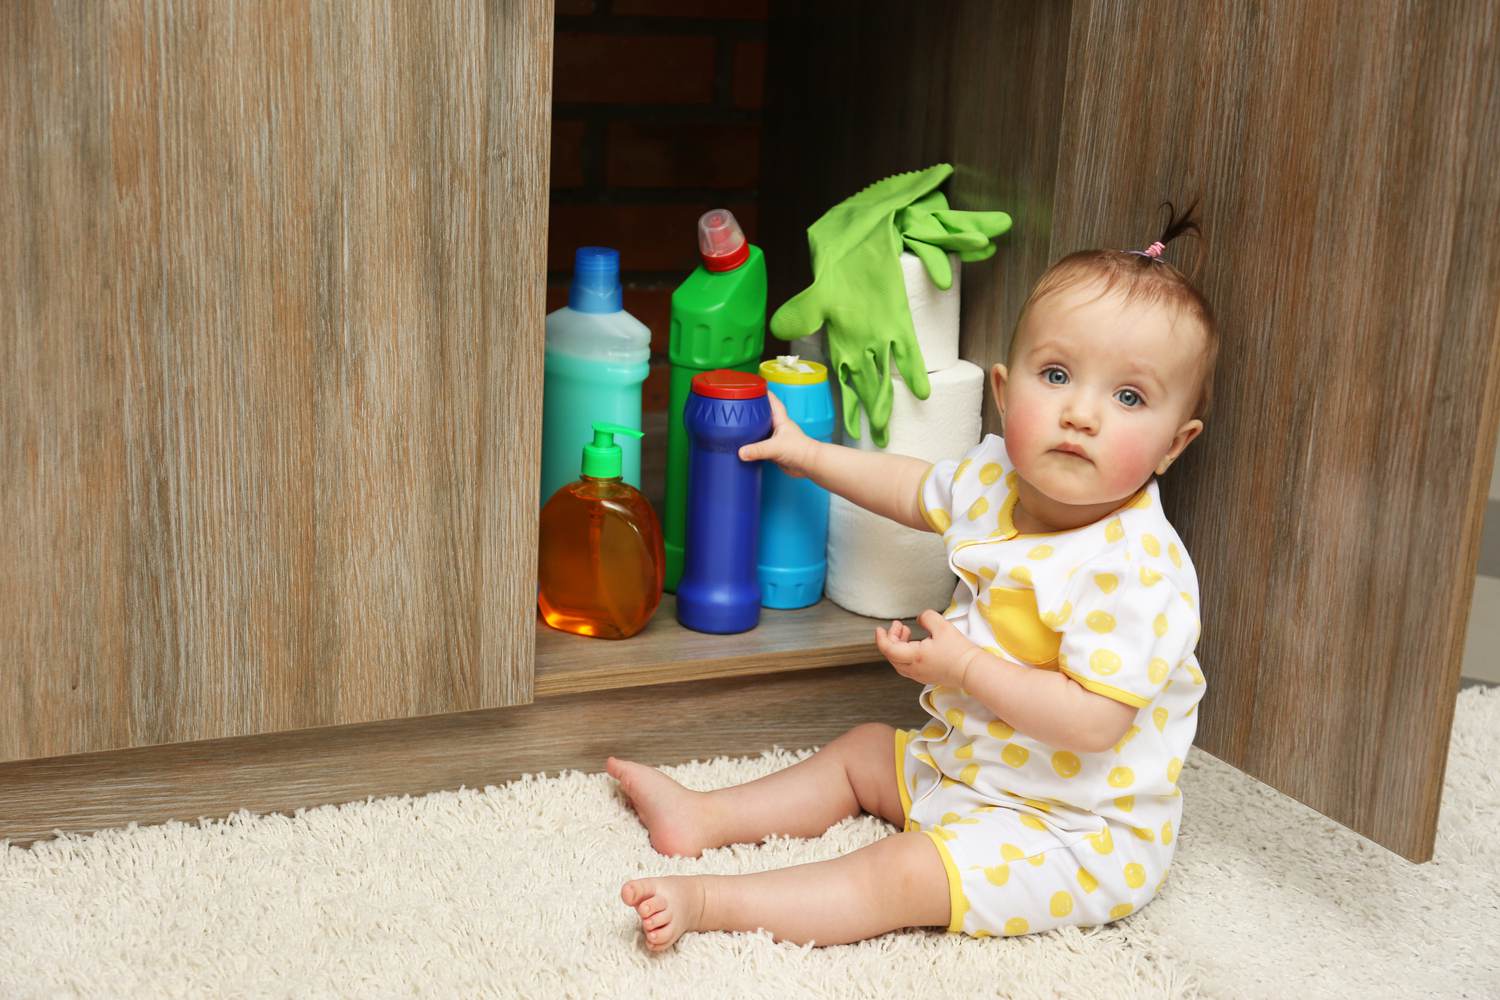 Spotting And Keeping Household Poisons Away From Infants by Dr. Chetan Ginigeri